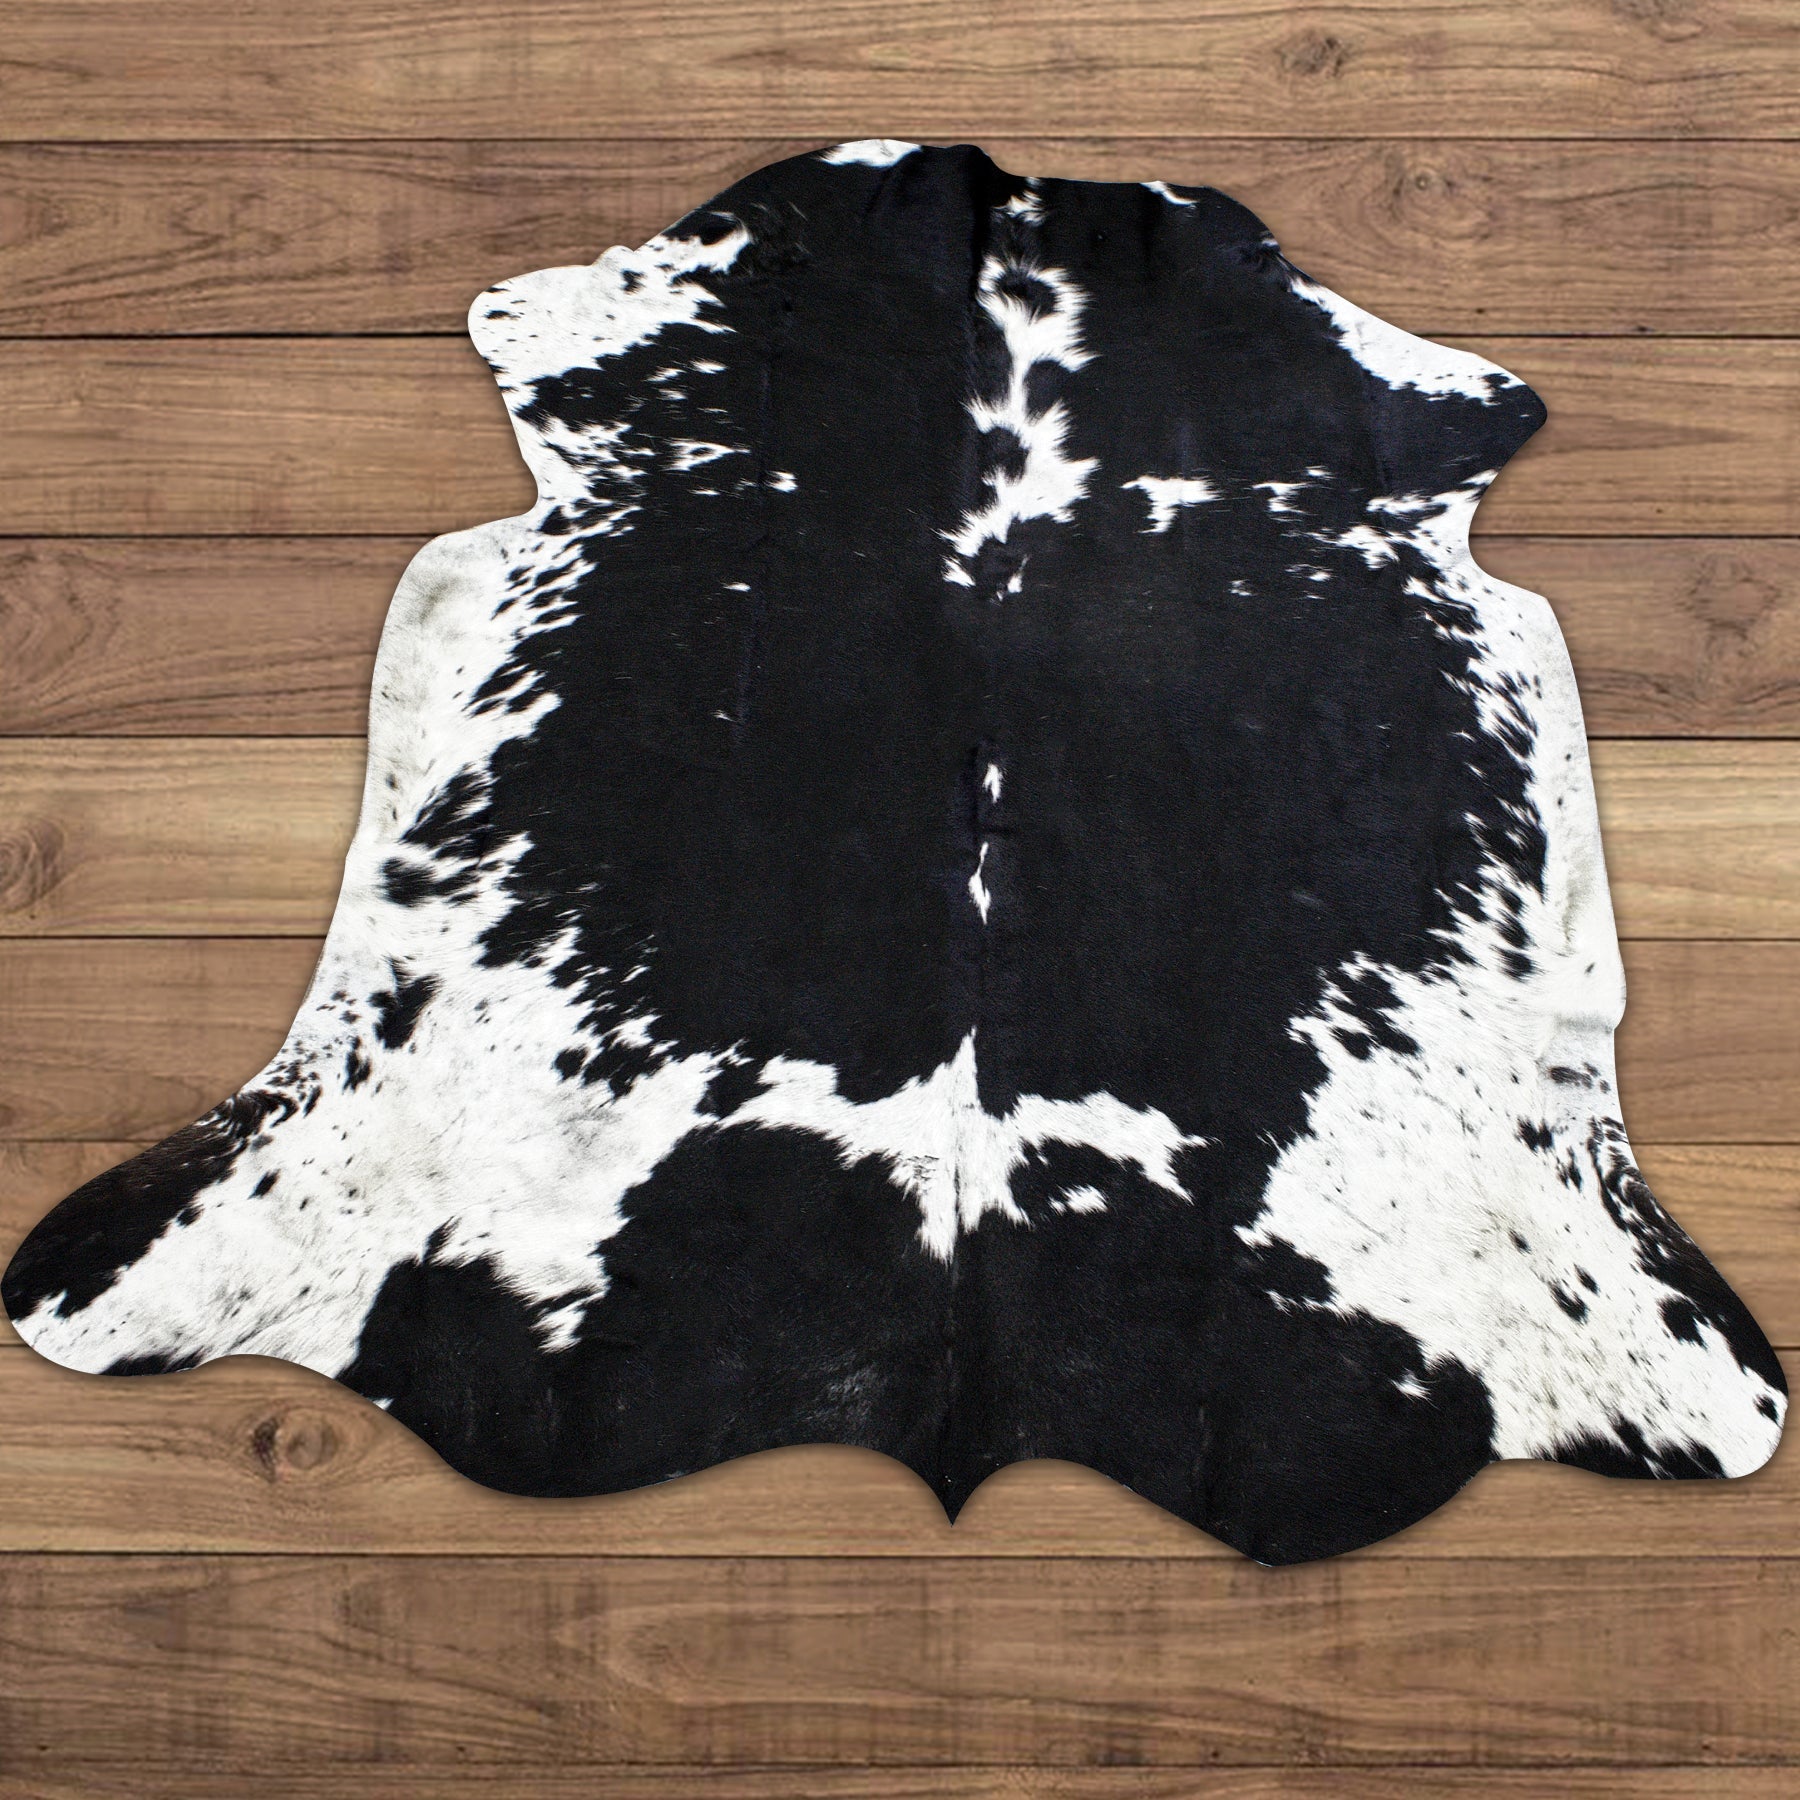 Large Black and White Cowhide Rug - Rodeo Cowhide Rugs